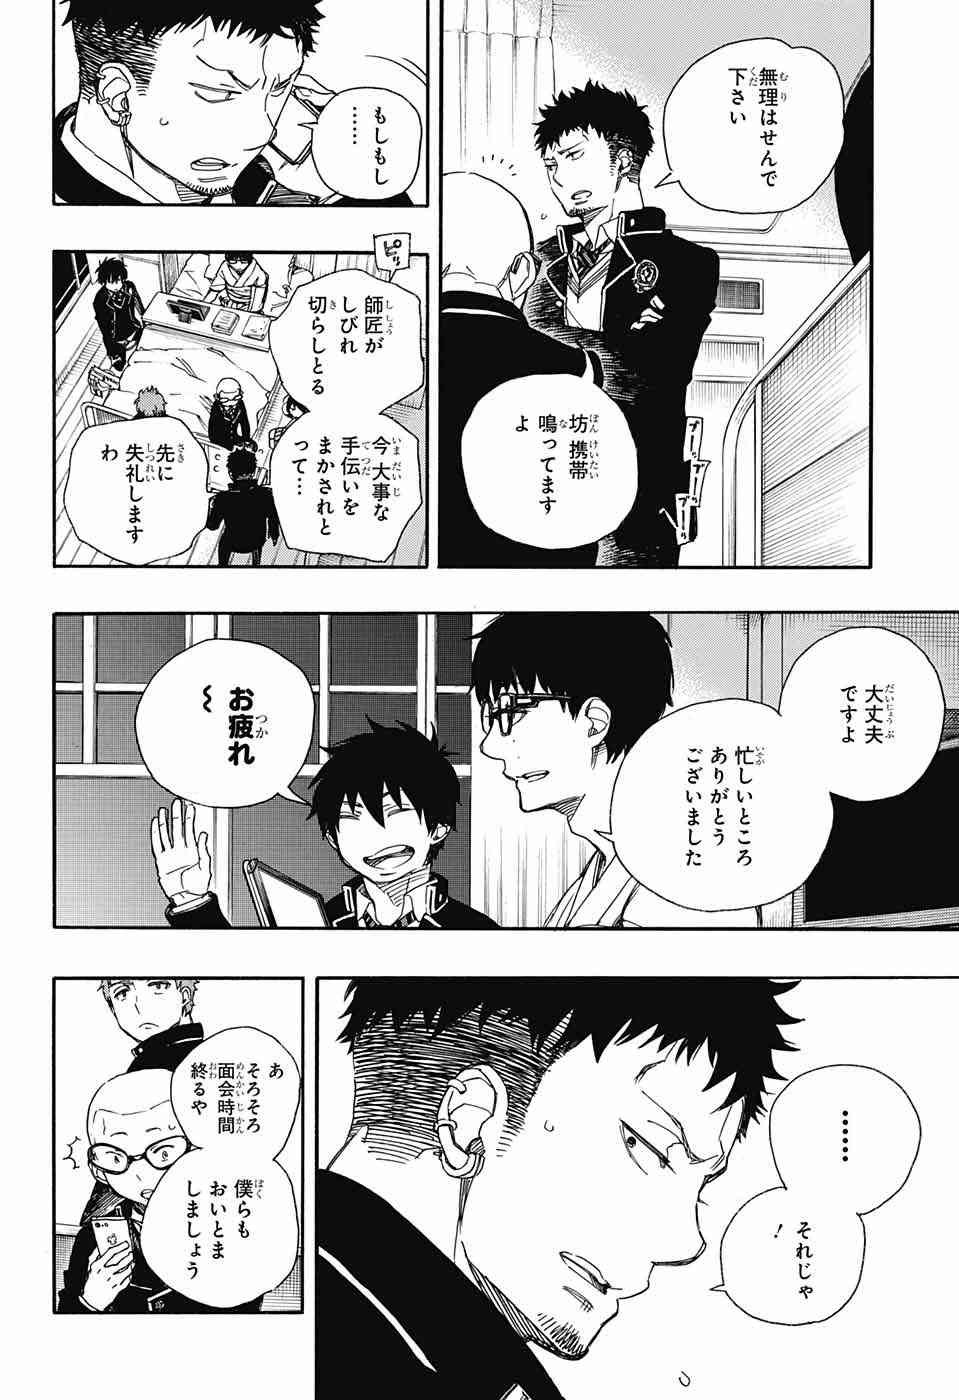 Ao no Exorcist - Chapter 82 - Page 4